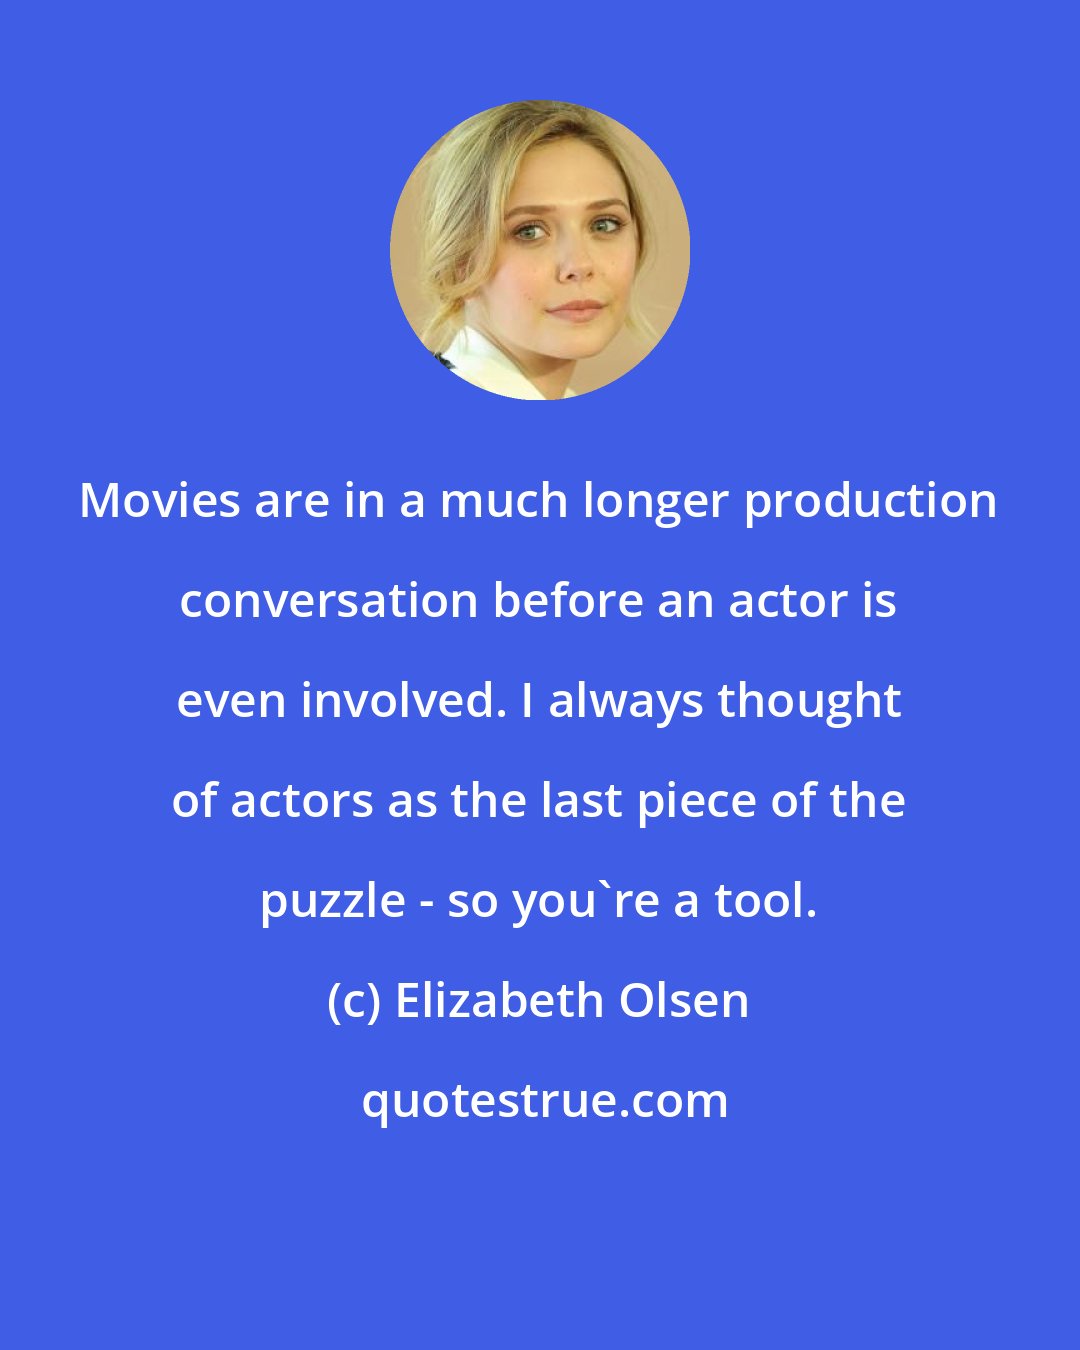 Elizabeth Olsen: Movies are in a much longer production conversation before an actor is even involved. I always thought of actors as the last piece of the puzzle - so you're a tool.